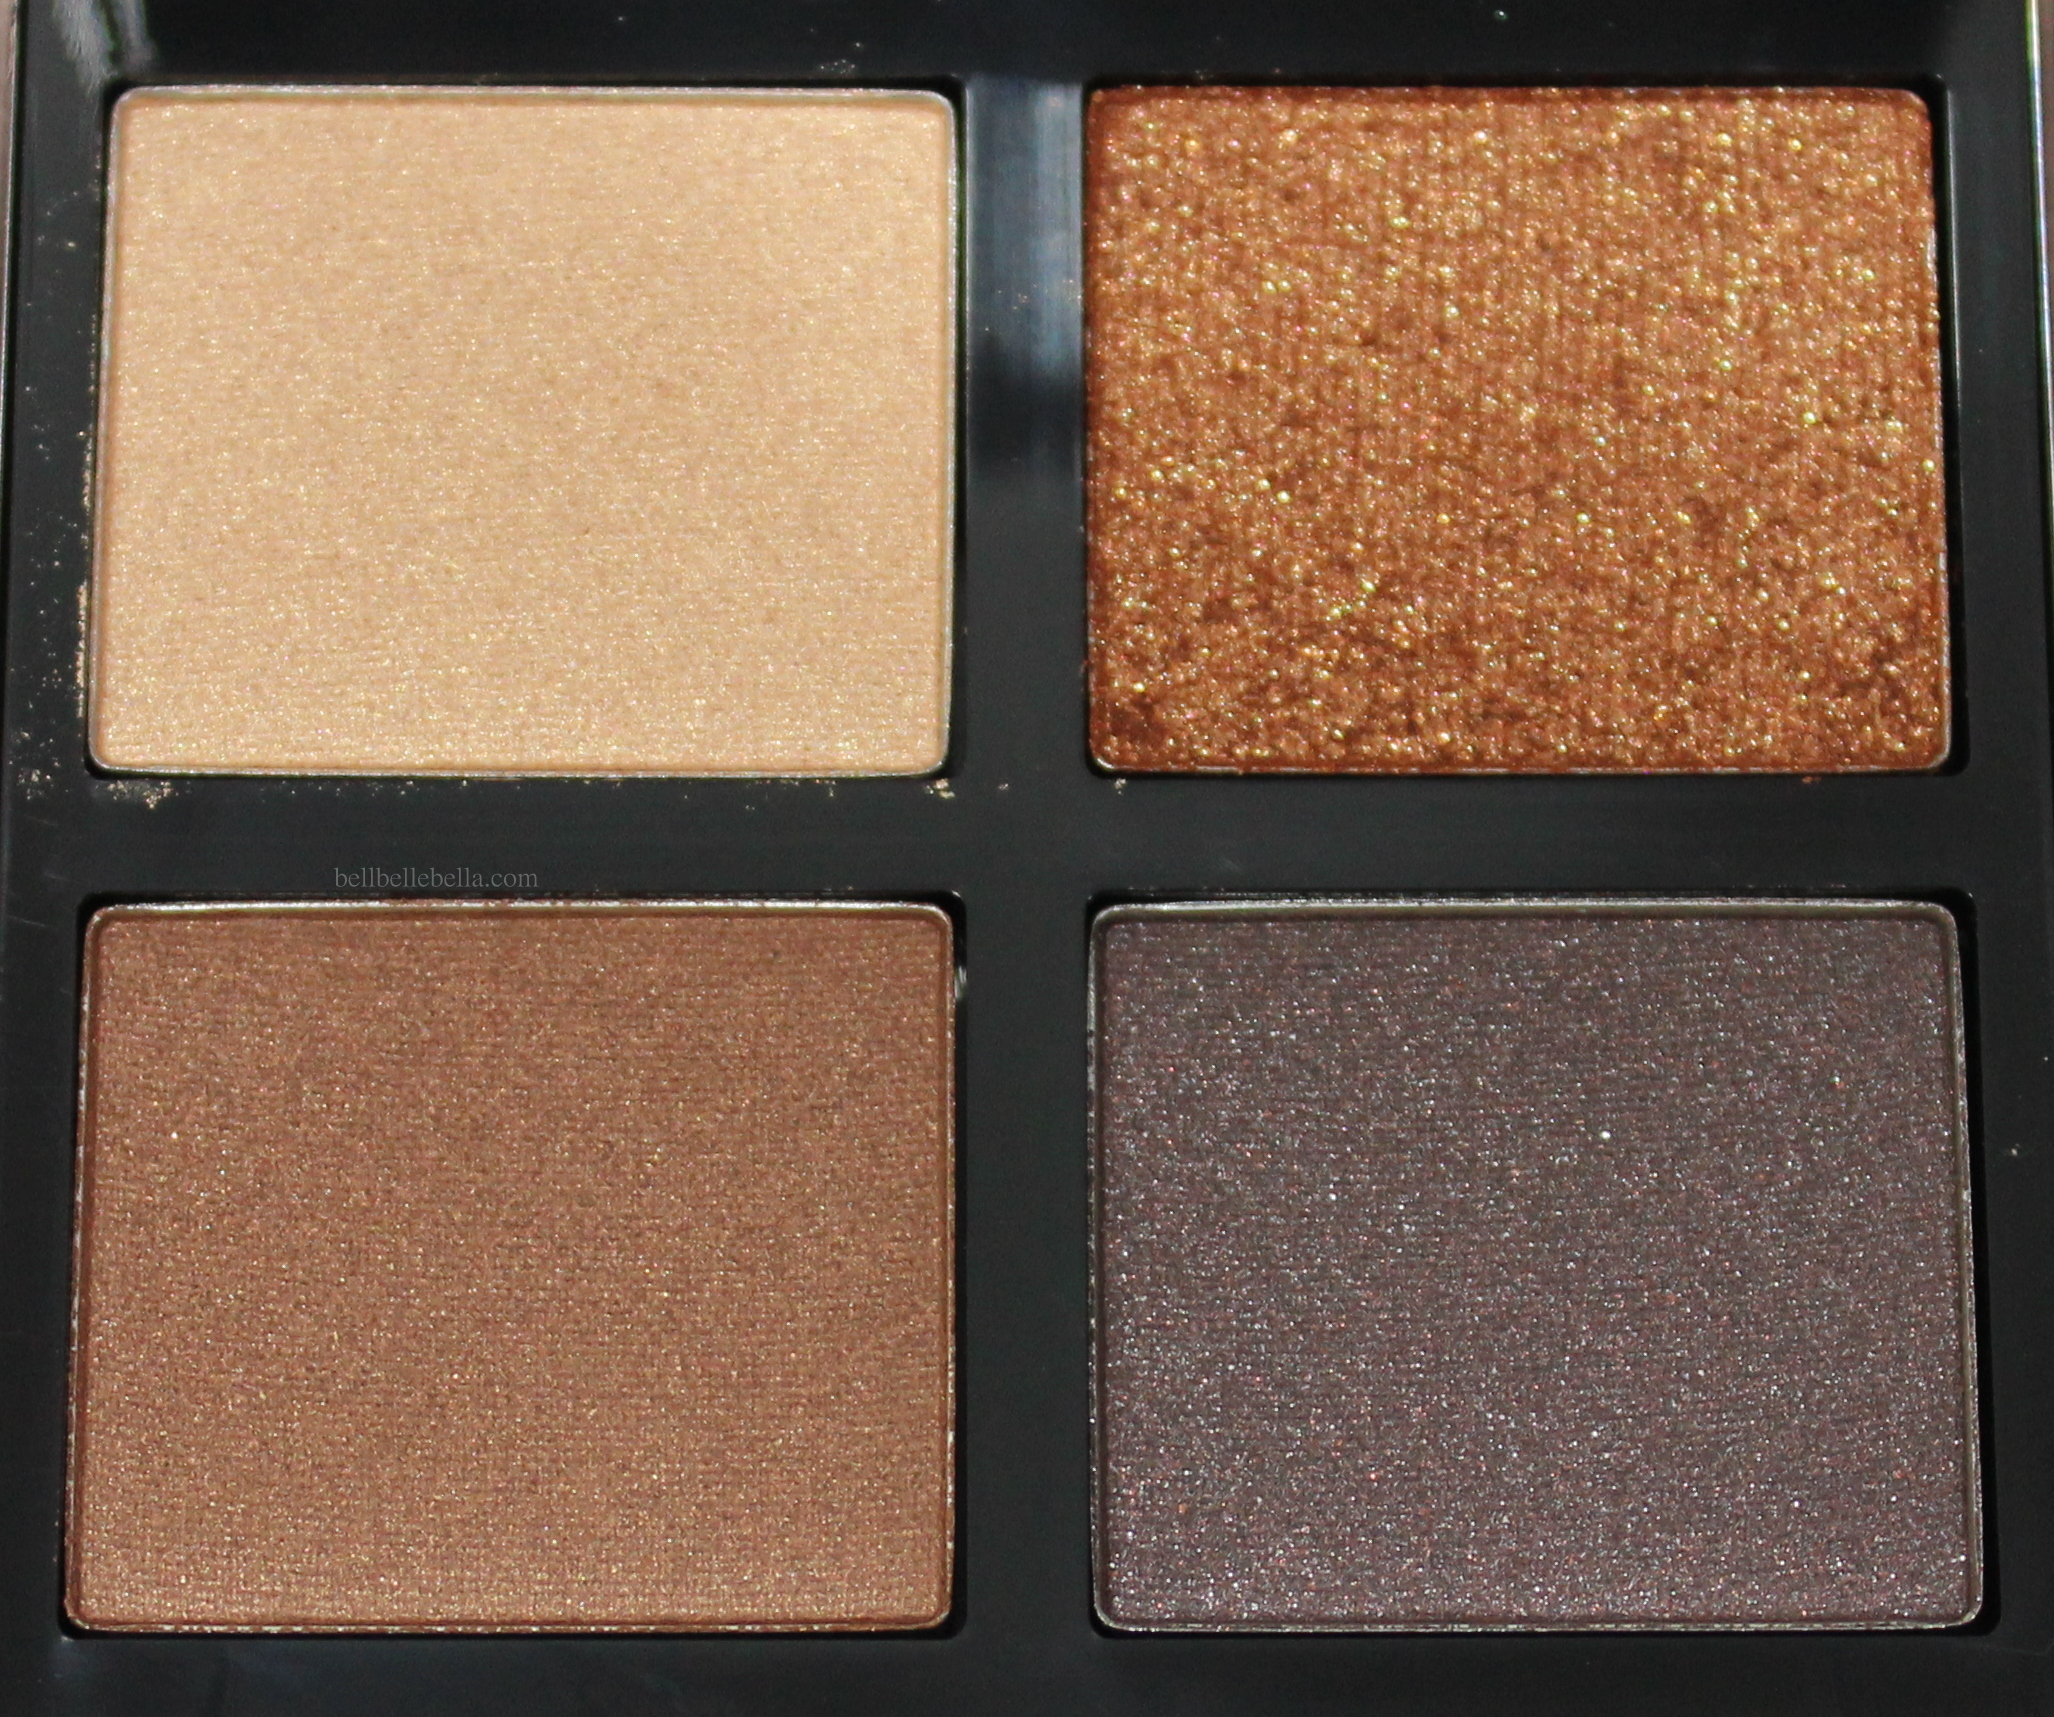 Tom Ford Eye Color Quad in Cognac Sable Review & Swatches graphic